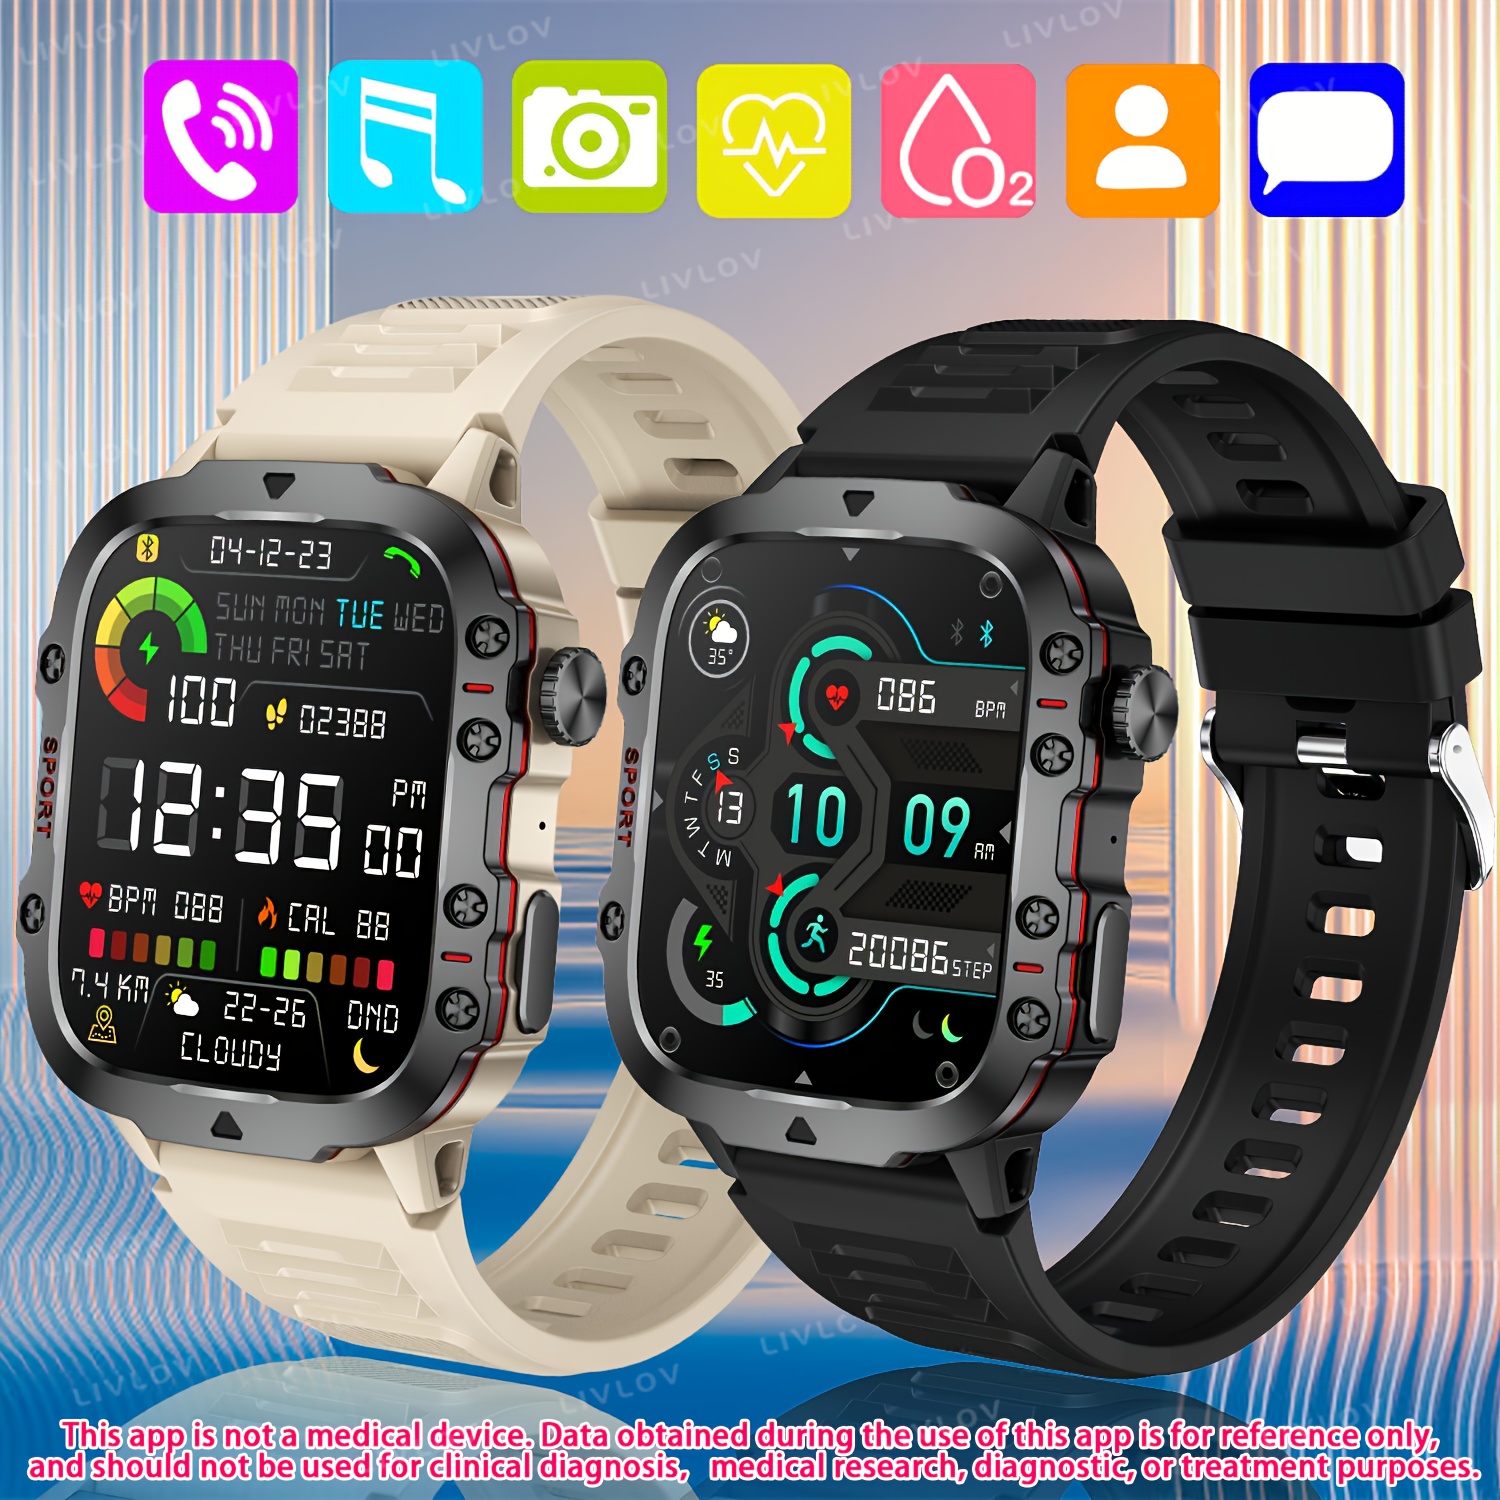 Watch PRO Smart Watch with Bluetooth Call, 1.96 Smartwatch for Men Women  IP68 Waterproof, Fitness Tracker 100 Sport Modes with Heart Rate Monitor  for